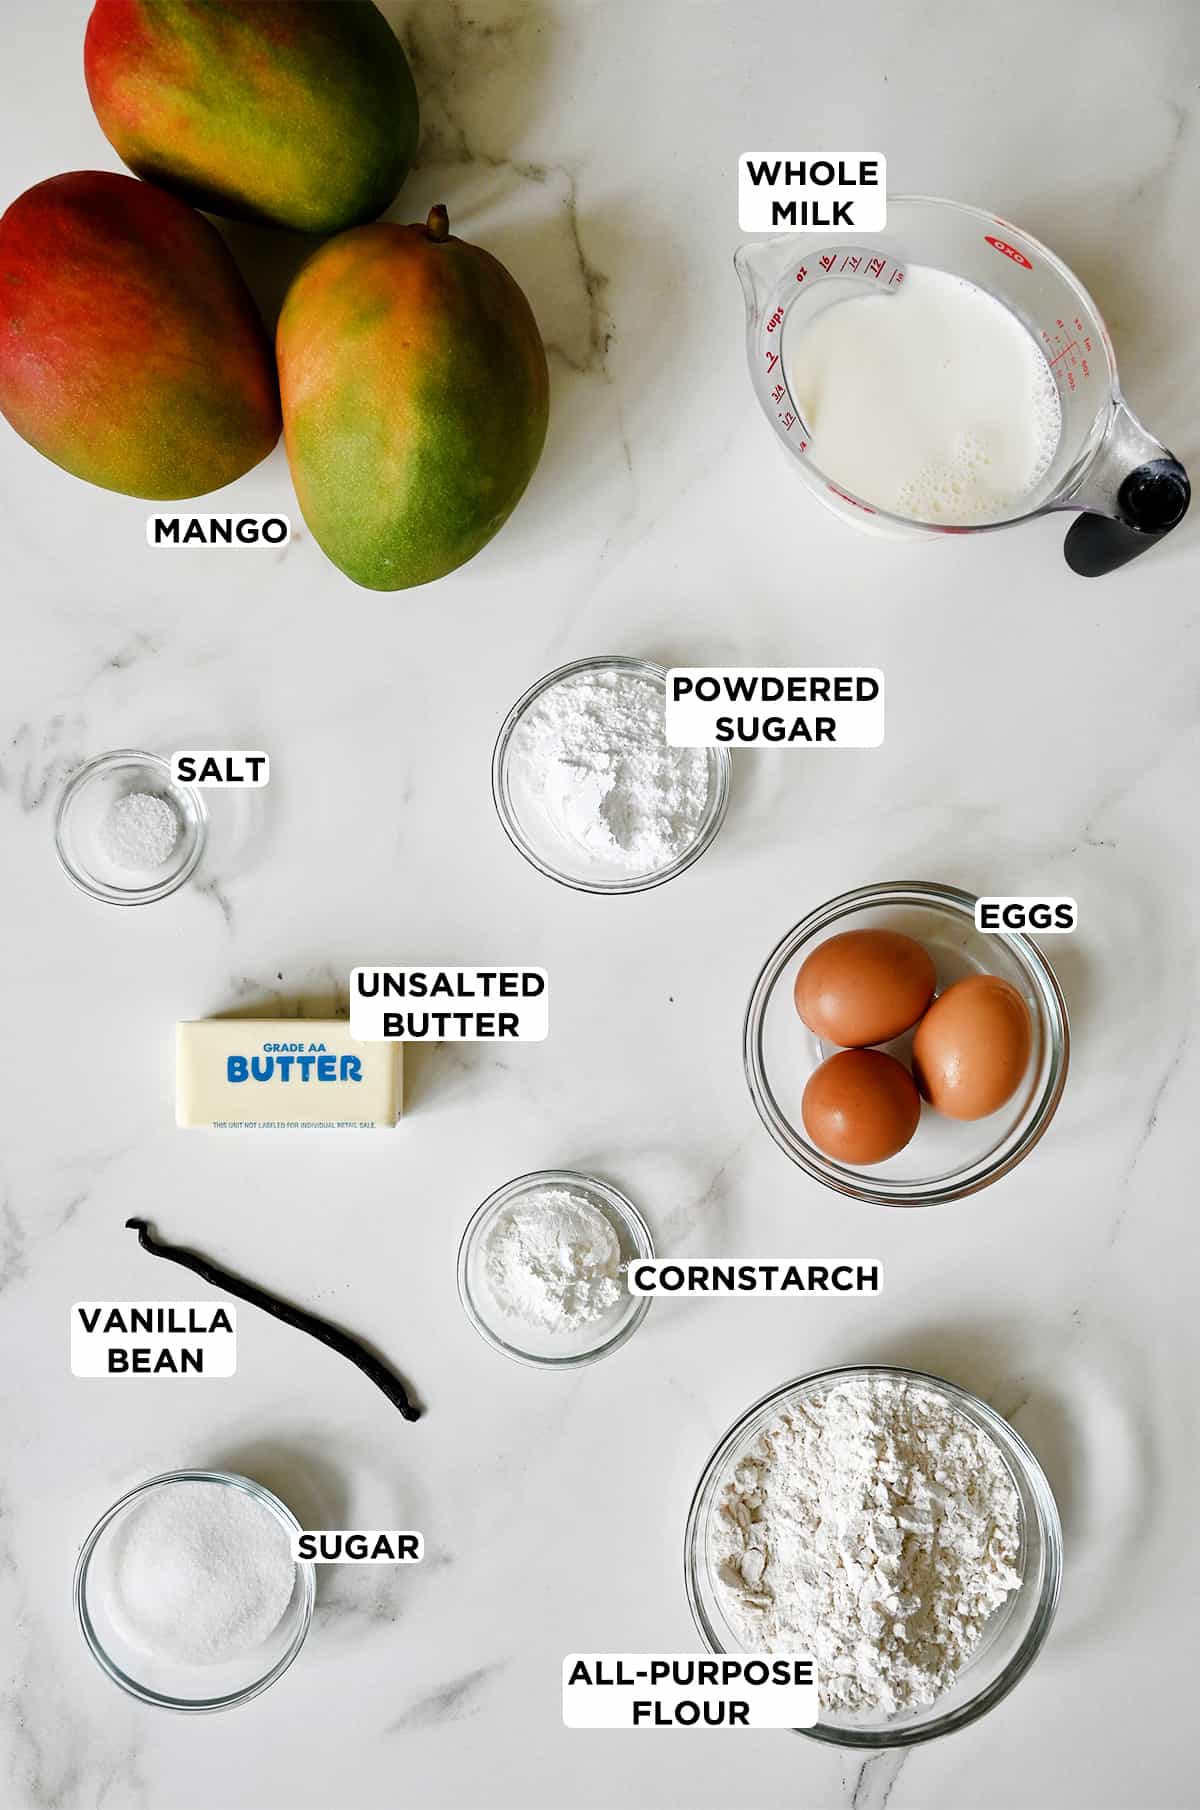 Three ripe mangoes next to a liquid measuring cup filled with whole milk and various sizes of glass bowls containing powdered sugar, eggs, a stick of unsalted butter, salt, a vanilla bean, flour and cornstarch.